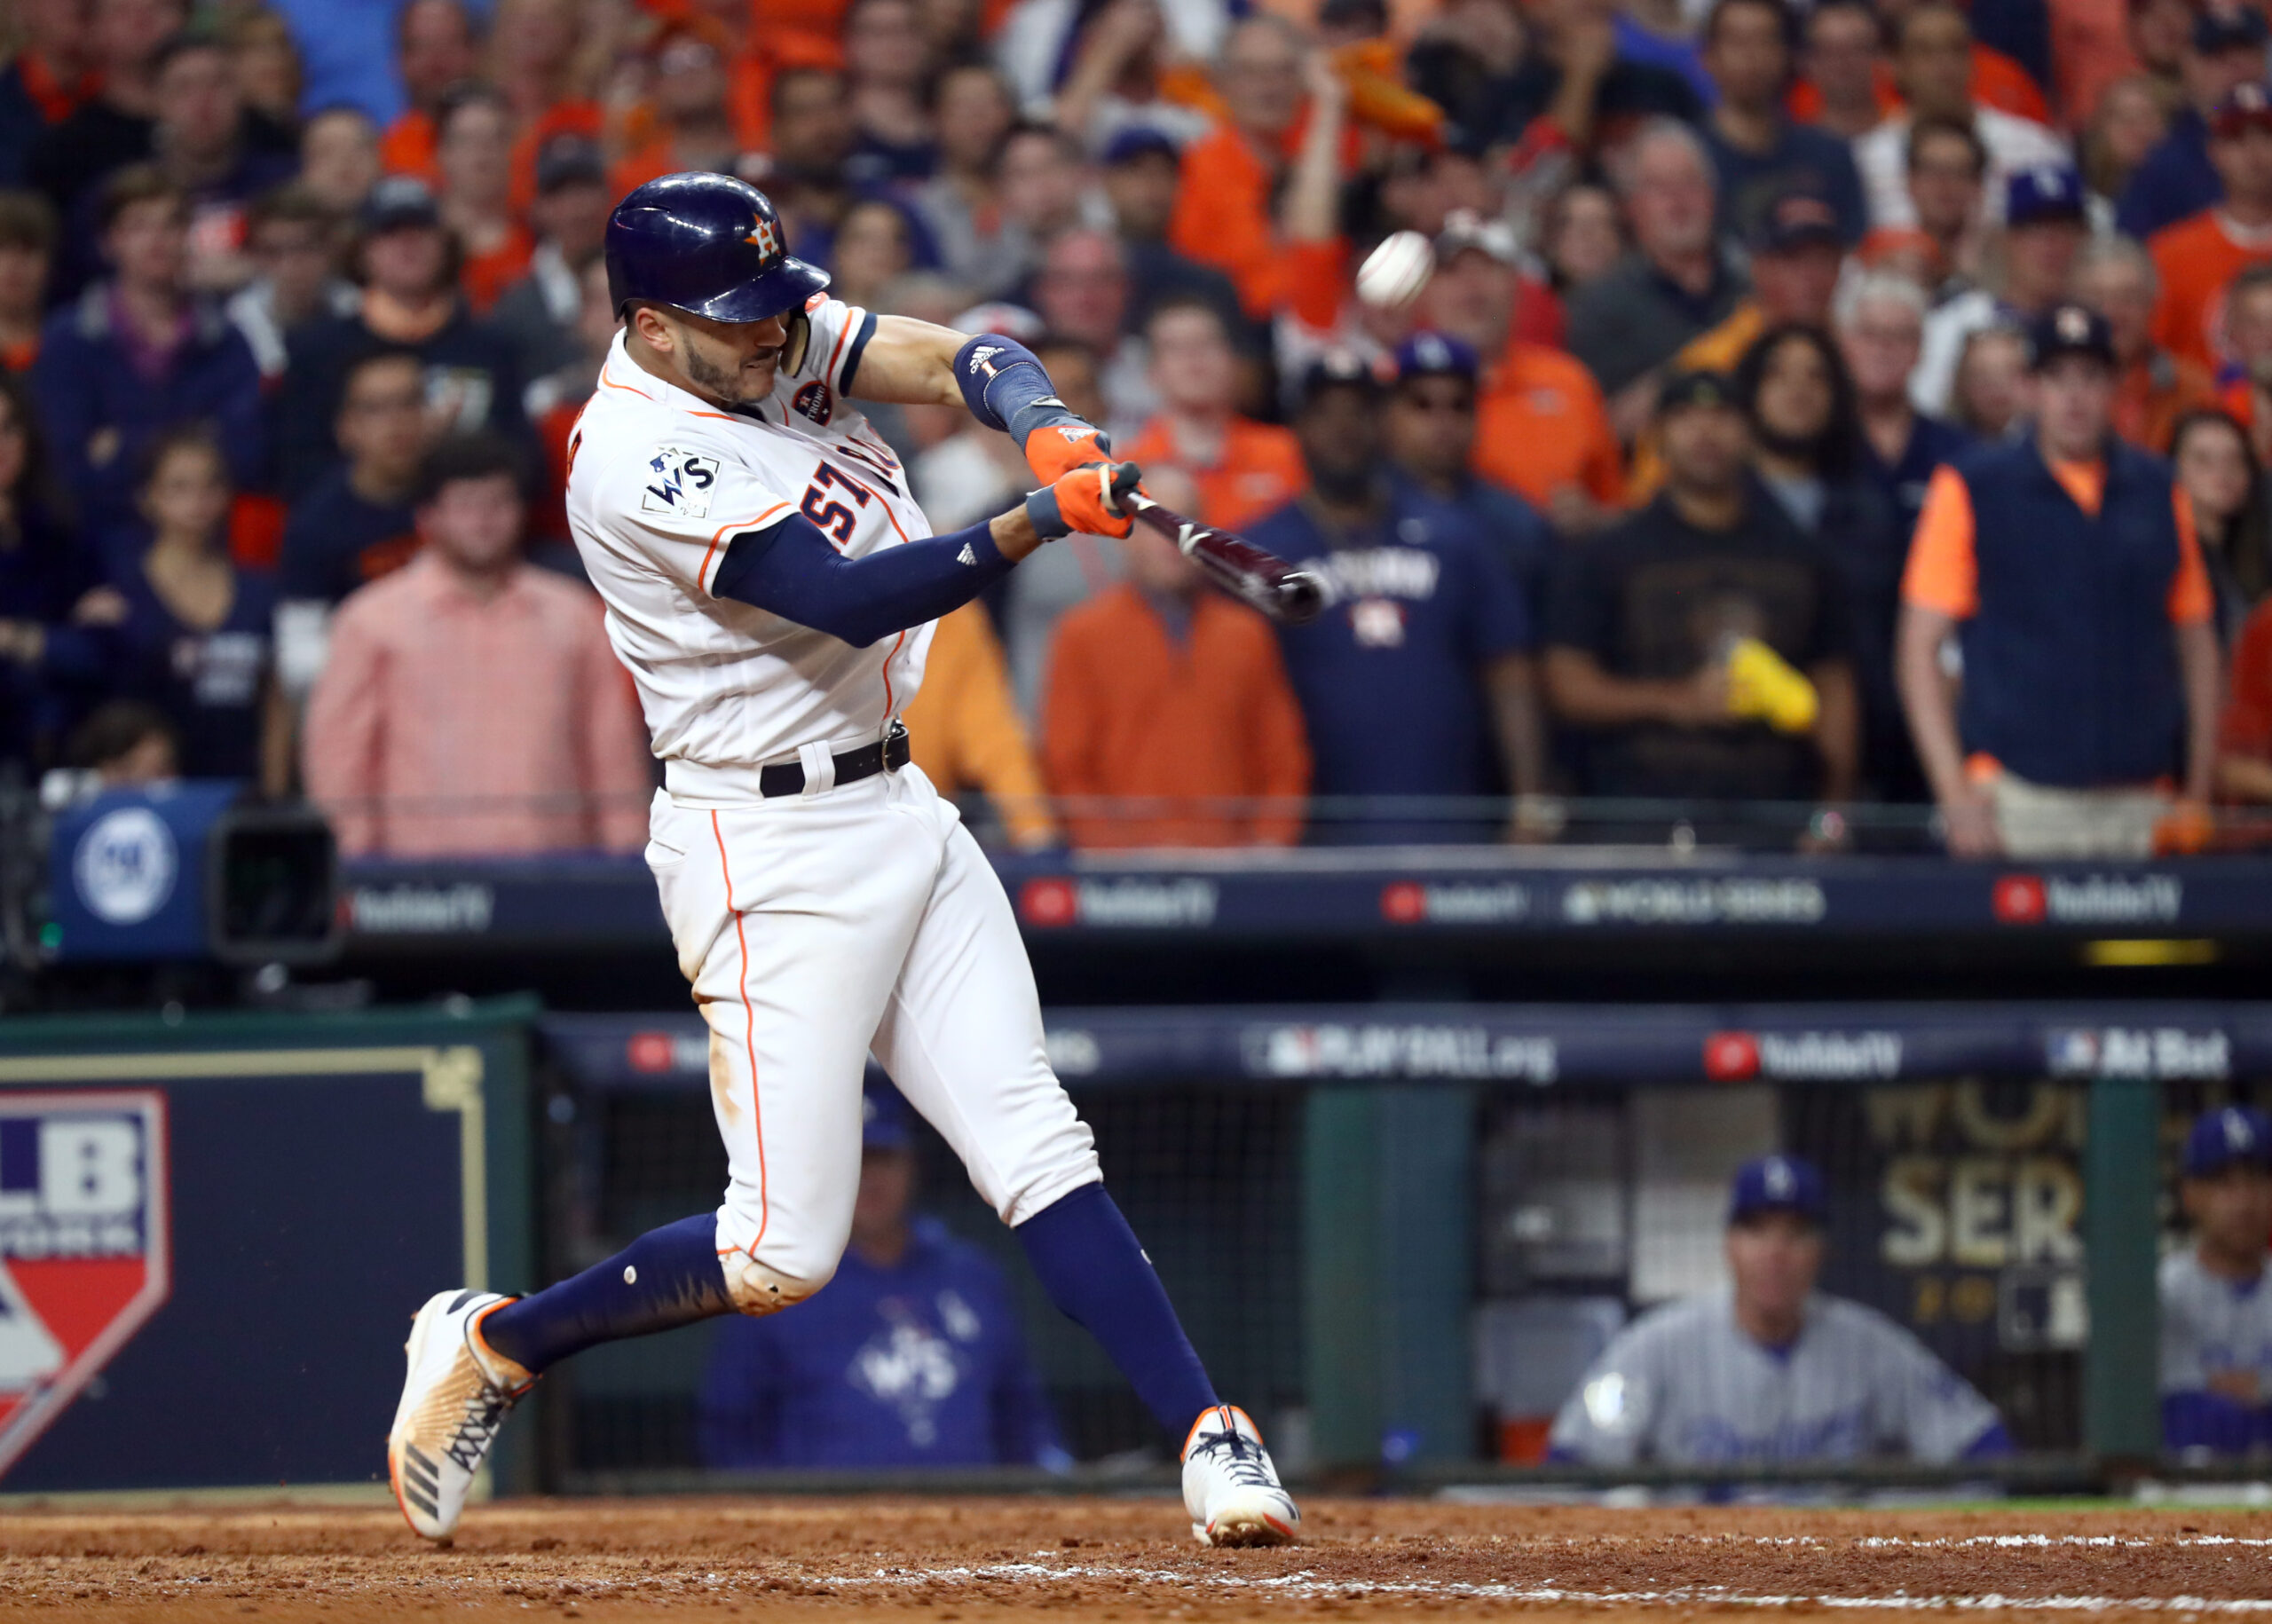 Carlos Correa or not, Brandon Crawford is ready to lead SF Giants